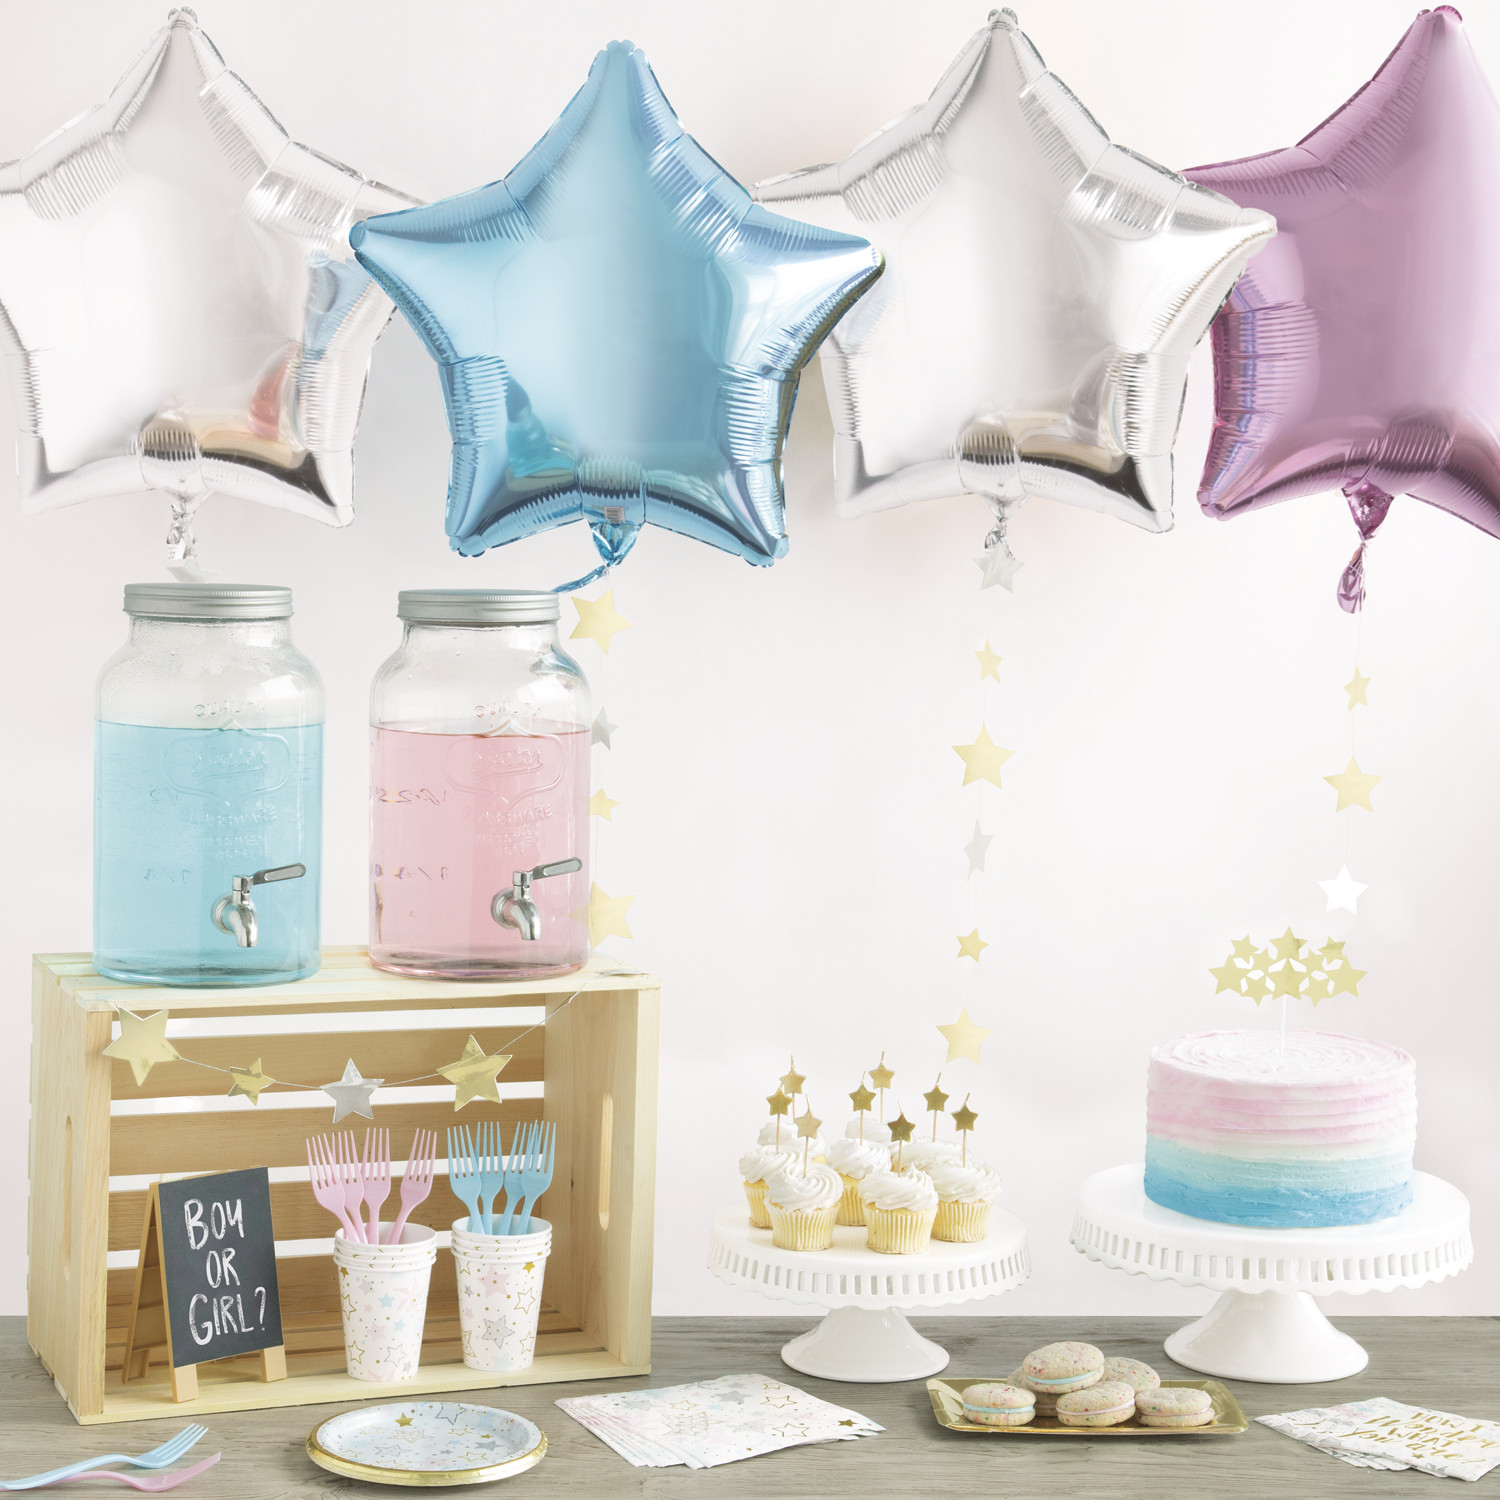 Reveal Gender Party Ideas
 Gender Reveal Party Ideas